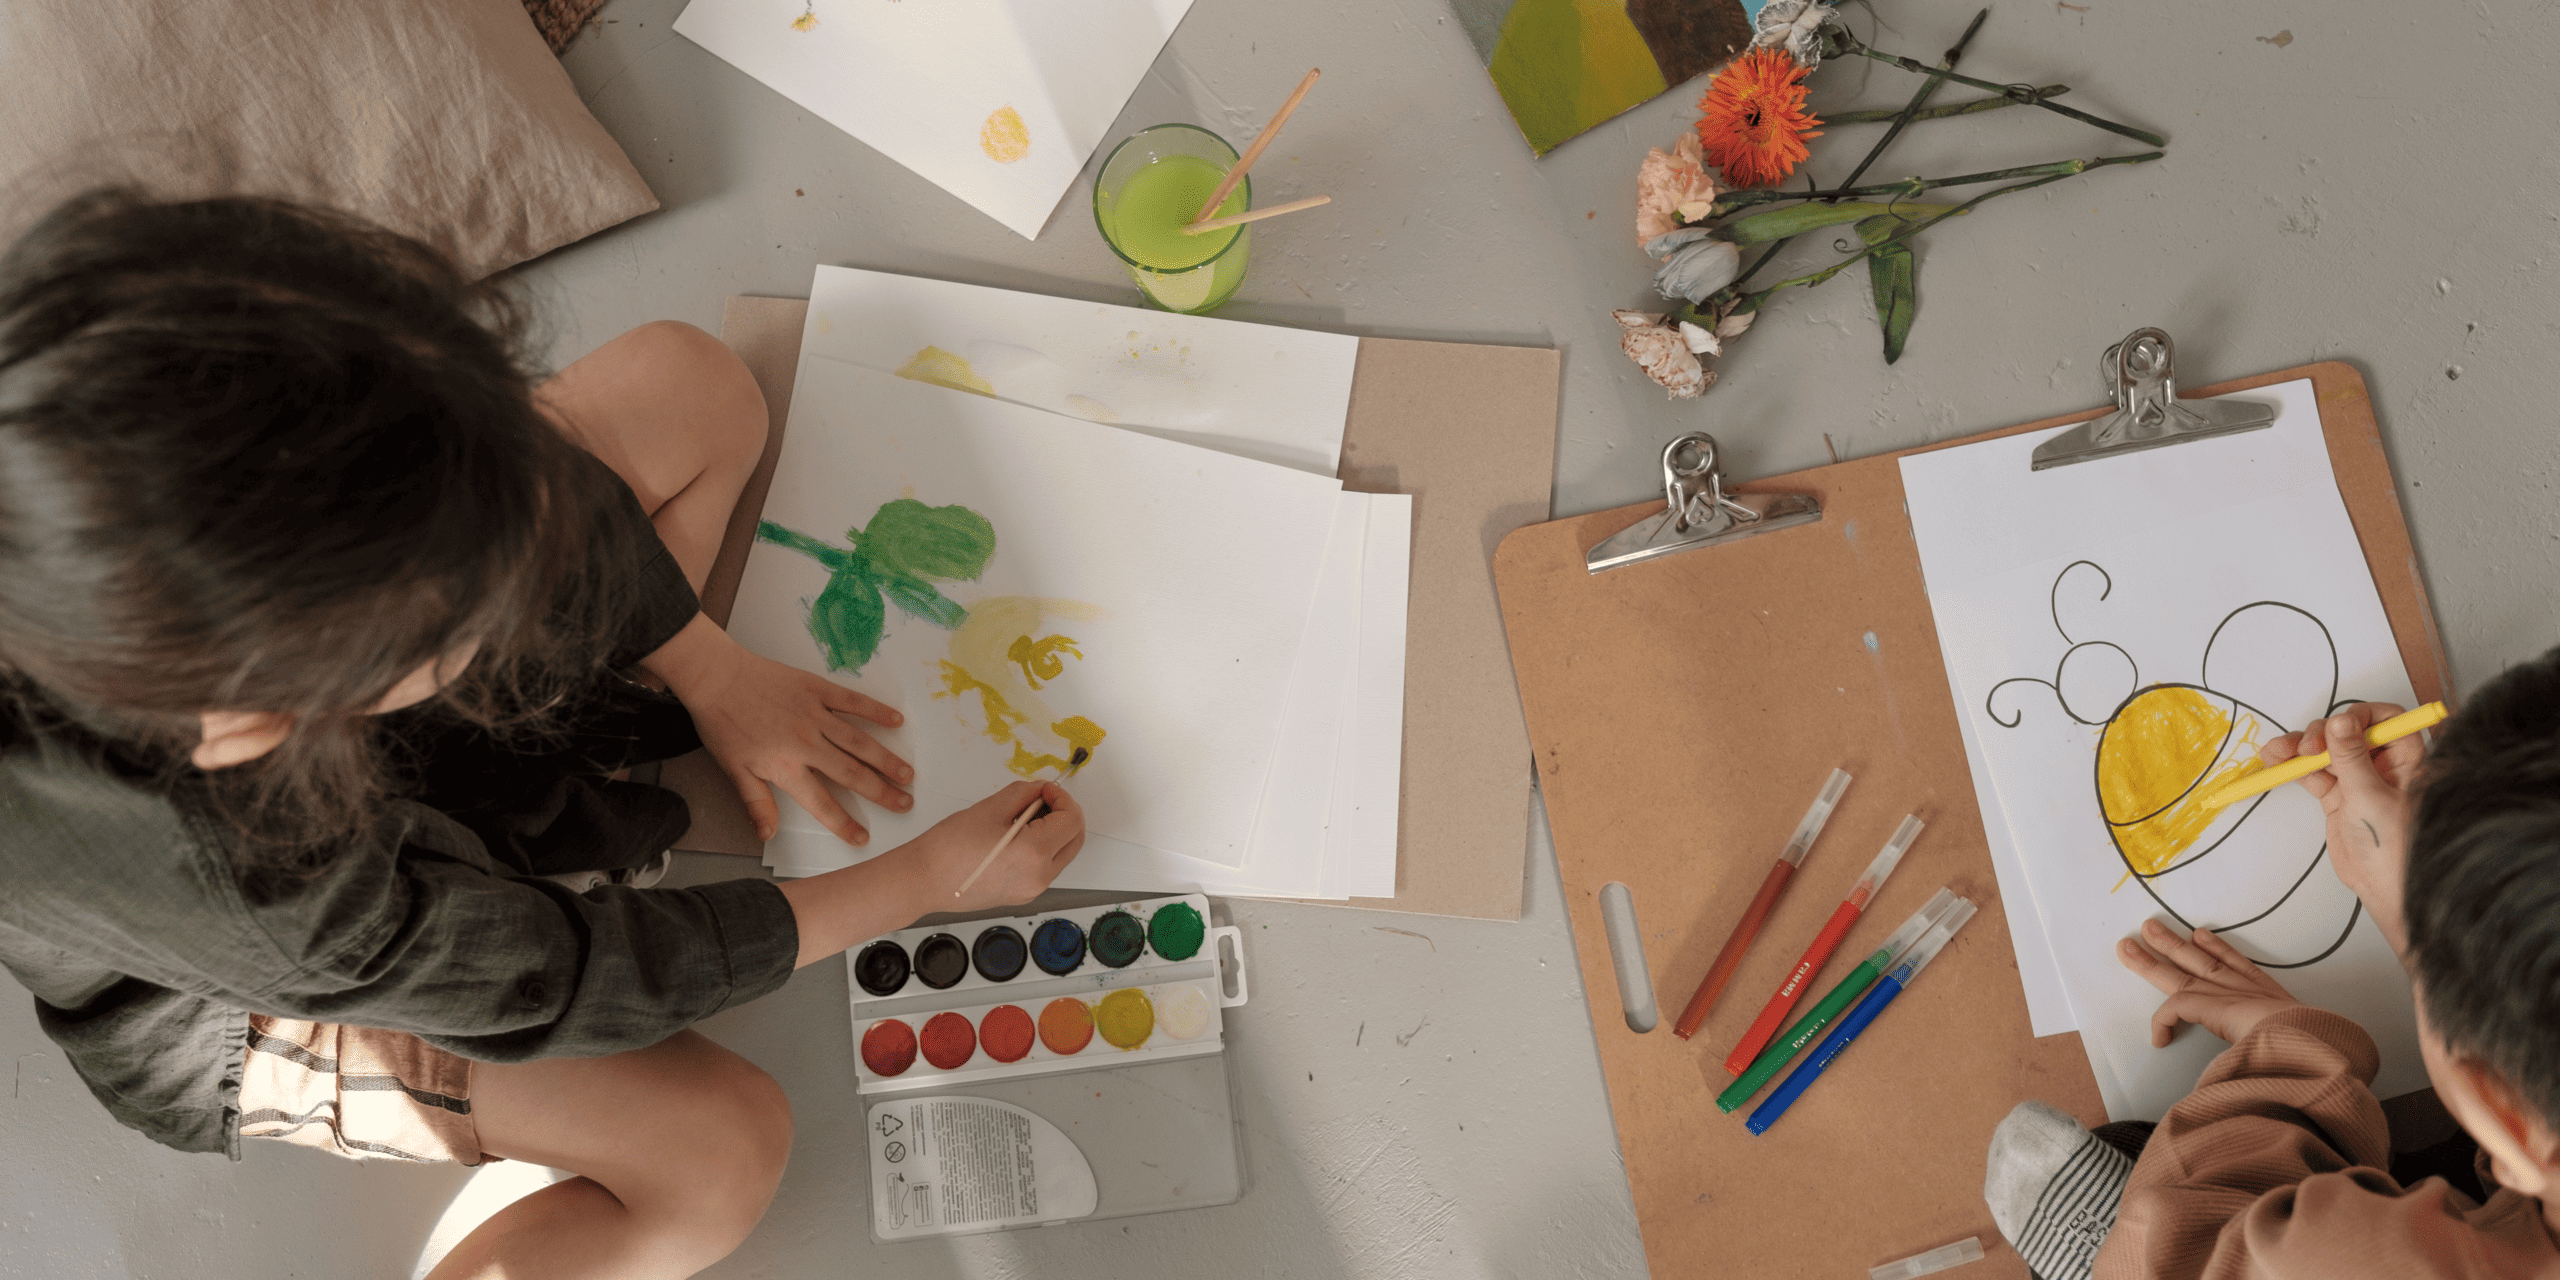 How to Learn and Relax with Chalk Art - The Adventurous Child